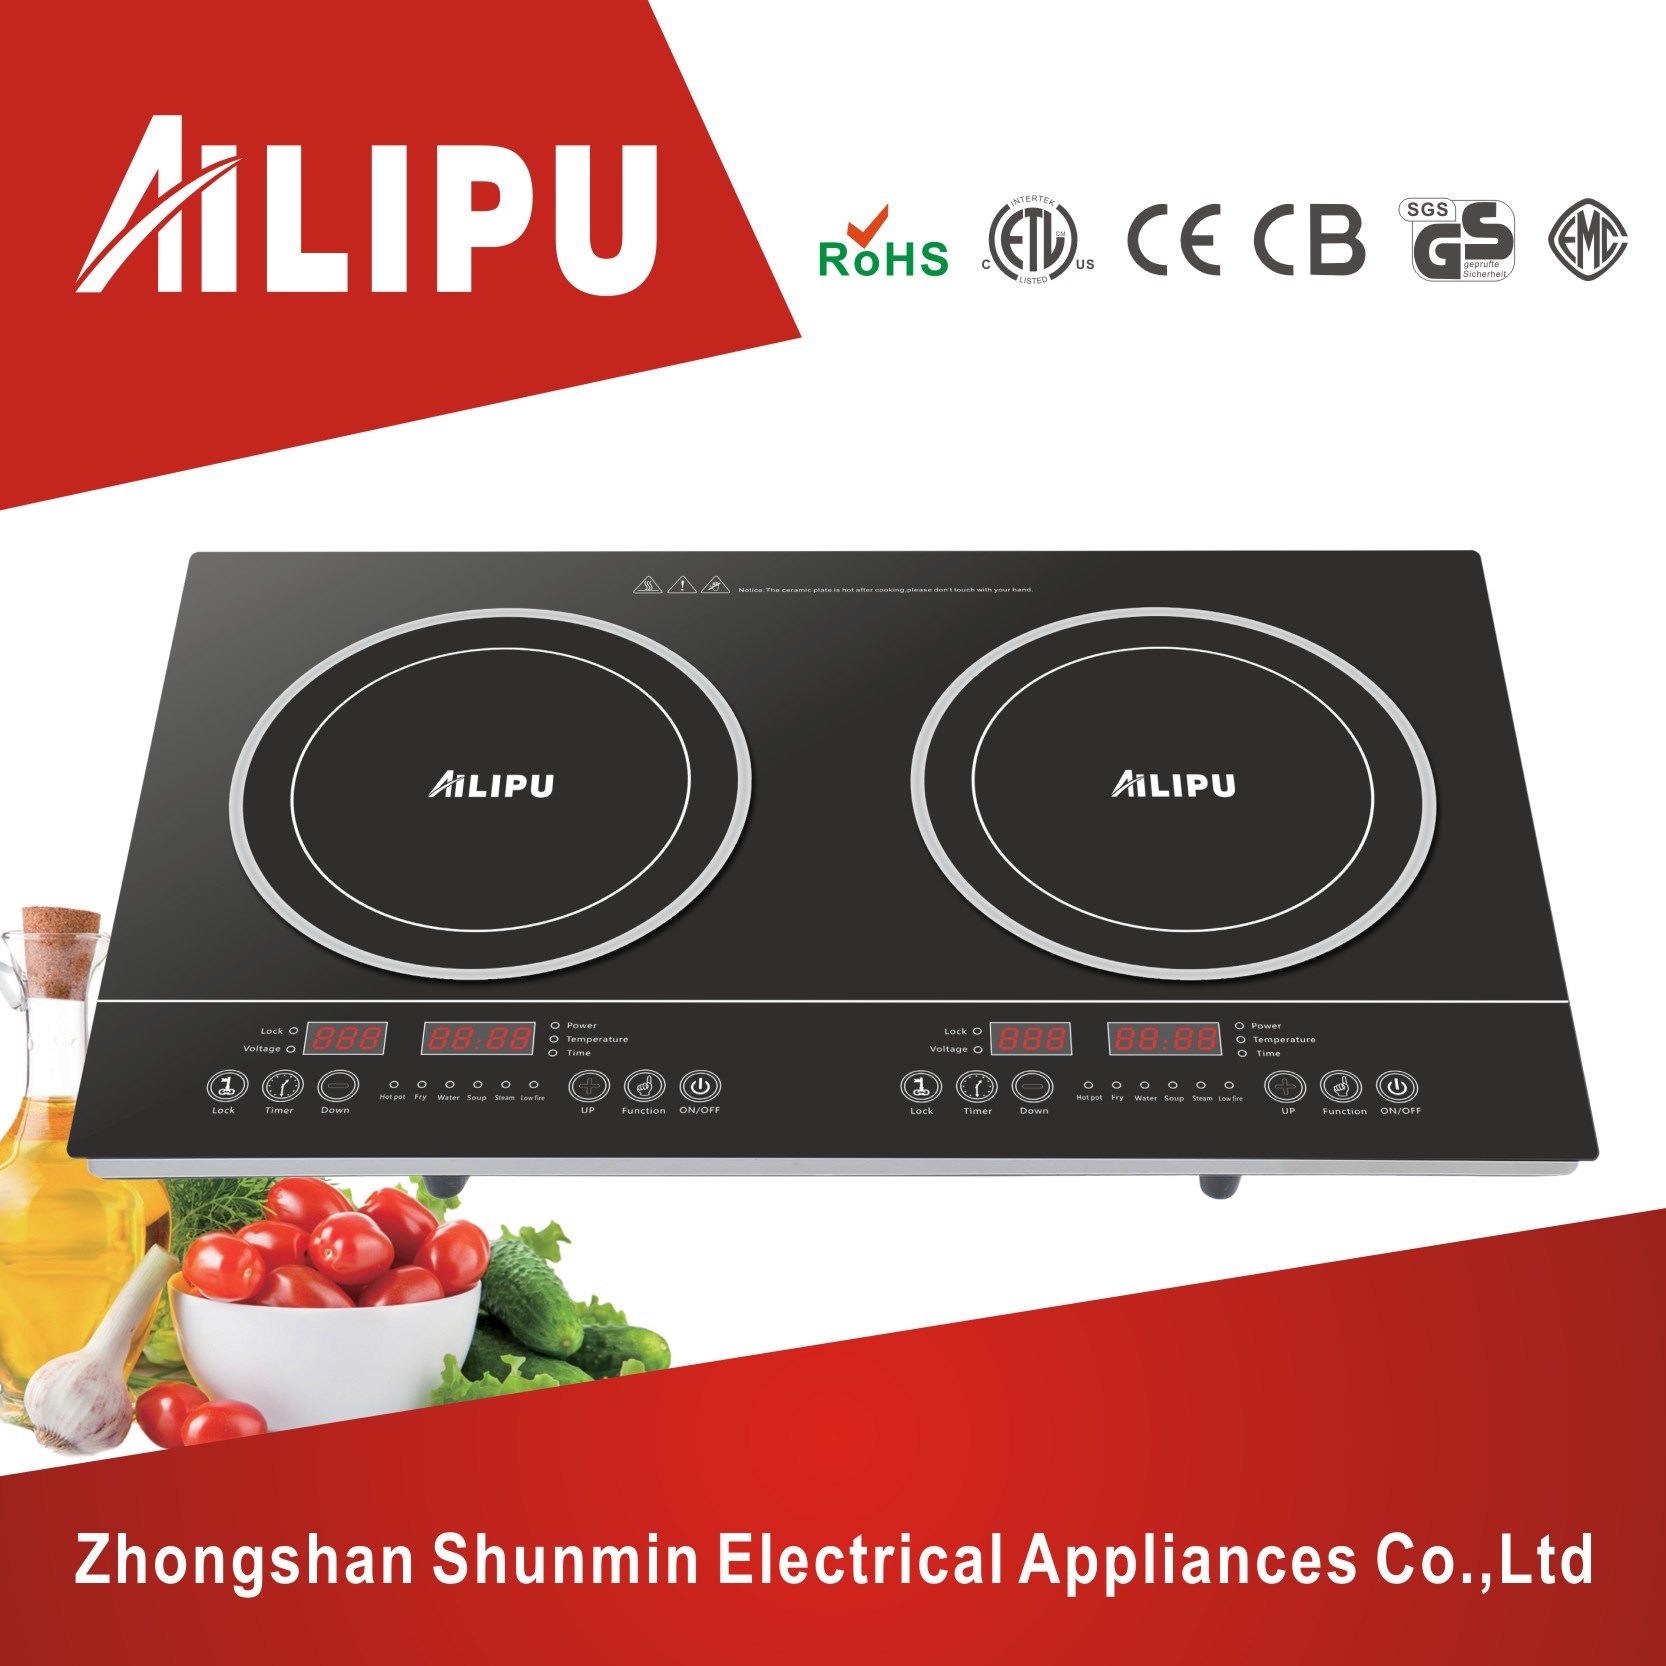 4000W Plastic Housing and Touch Screen Double Burner Induction Cooker/Induction Cooktop